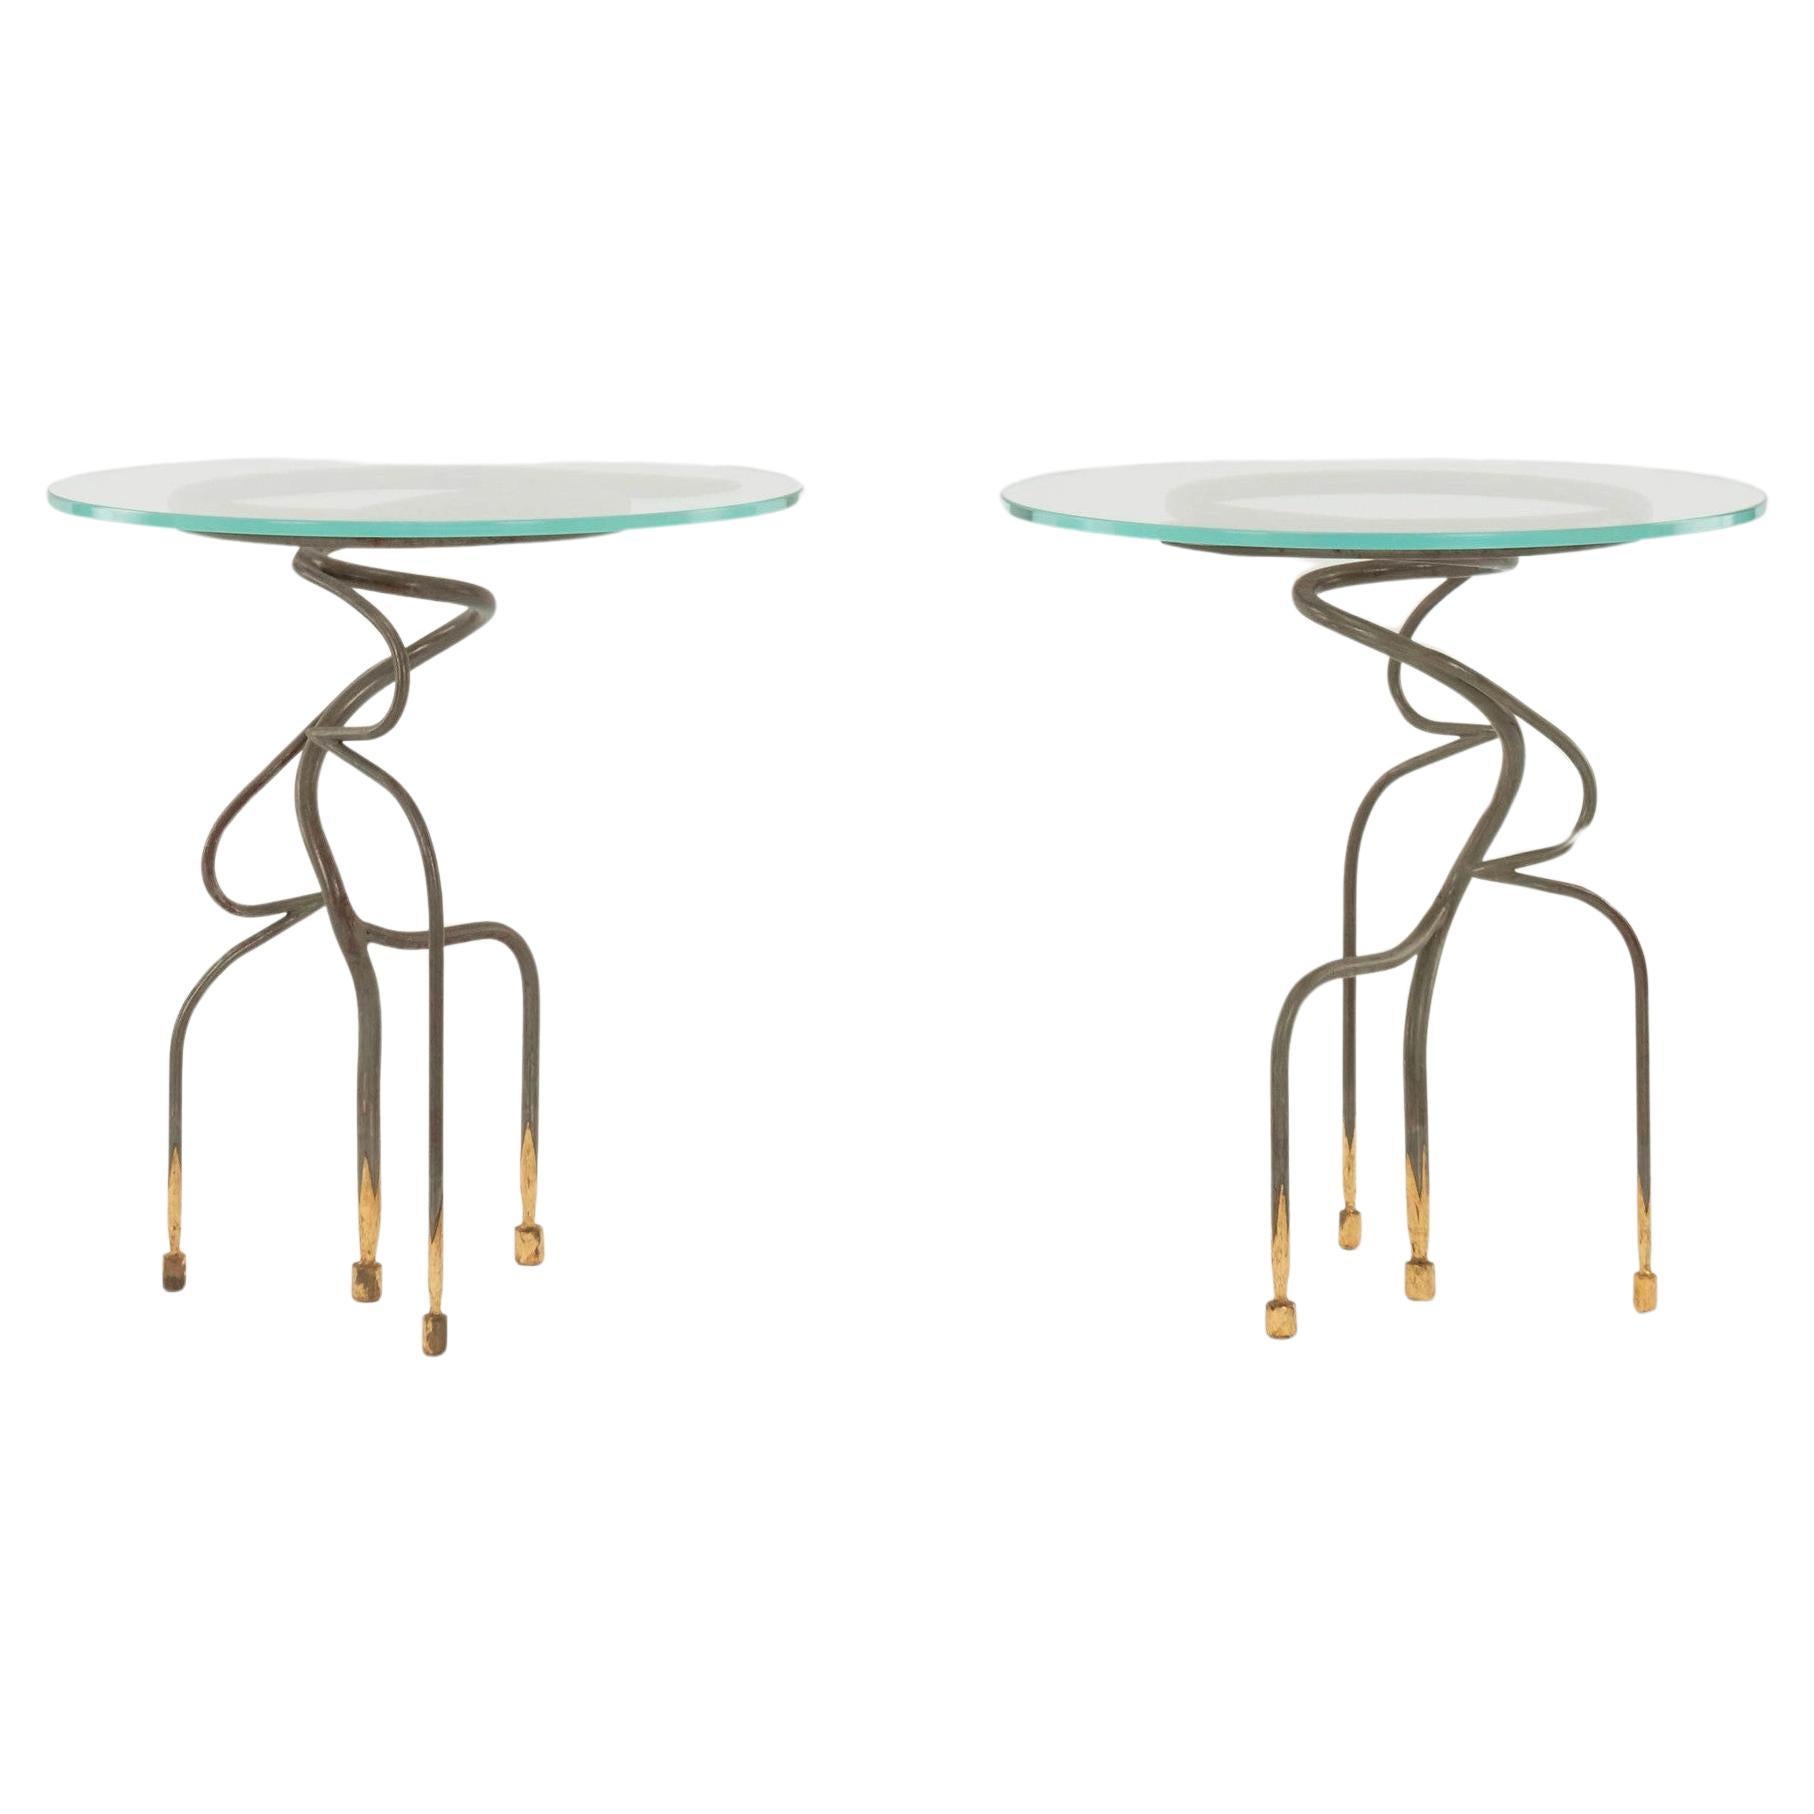 Pair Steel Brass Glass Snake Style Tables